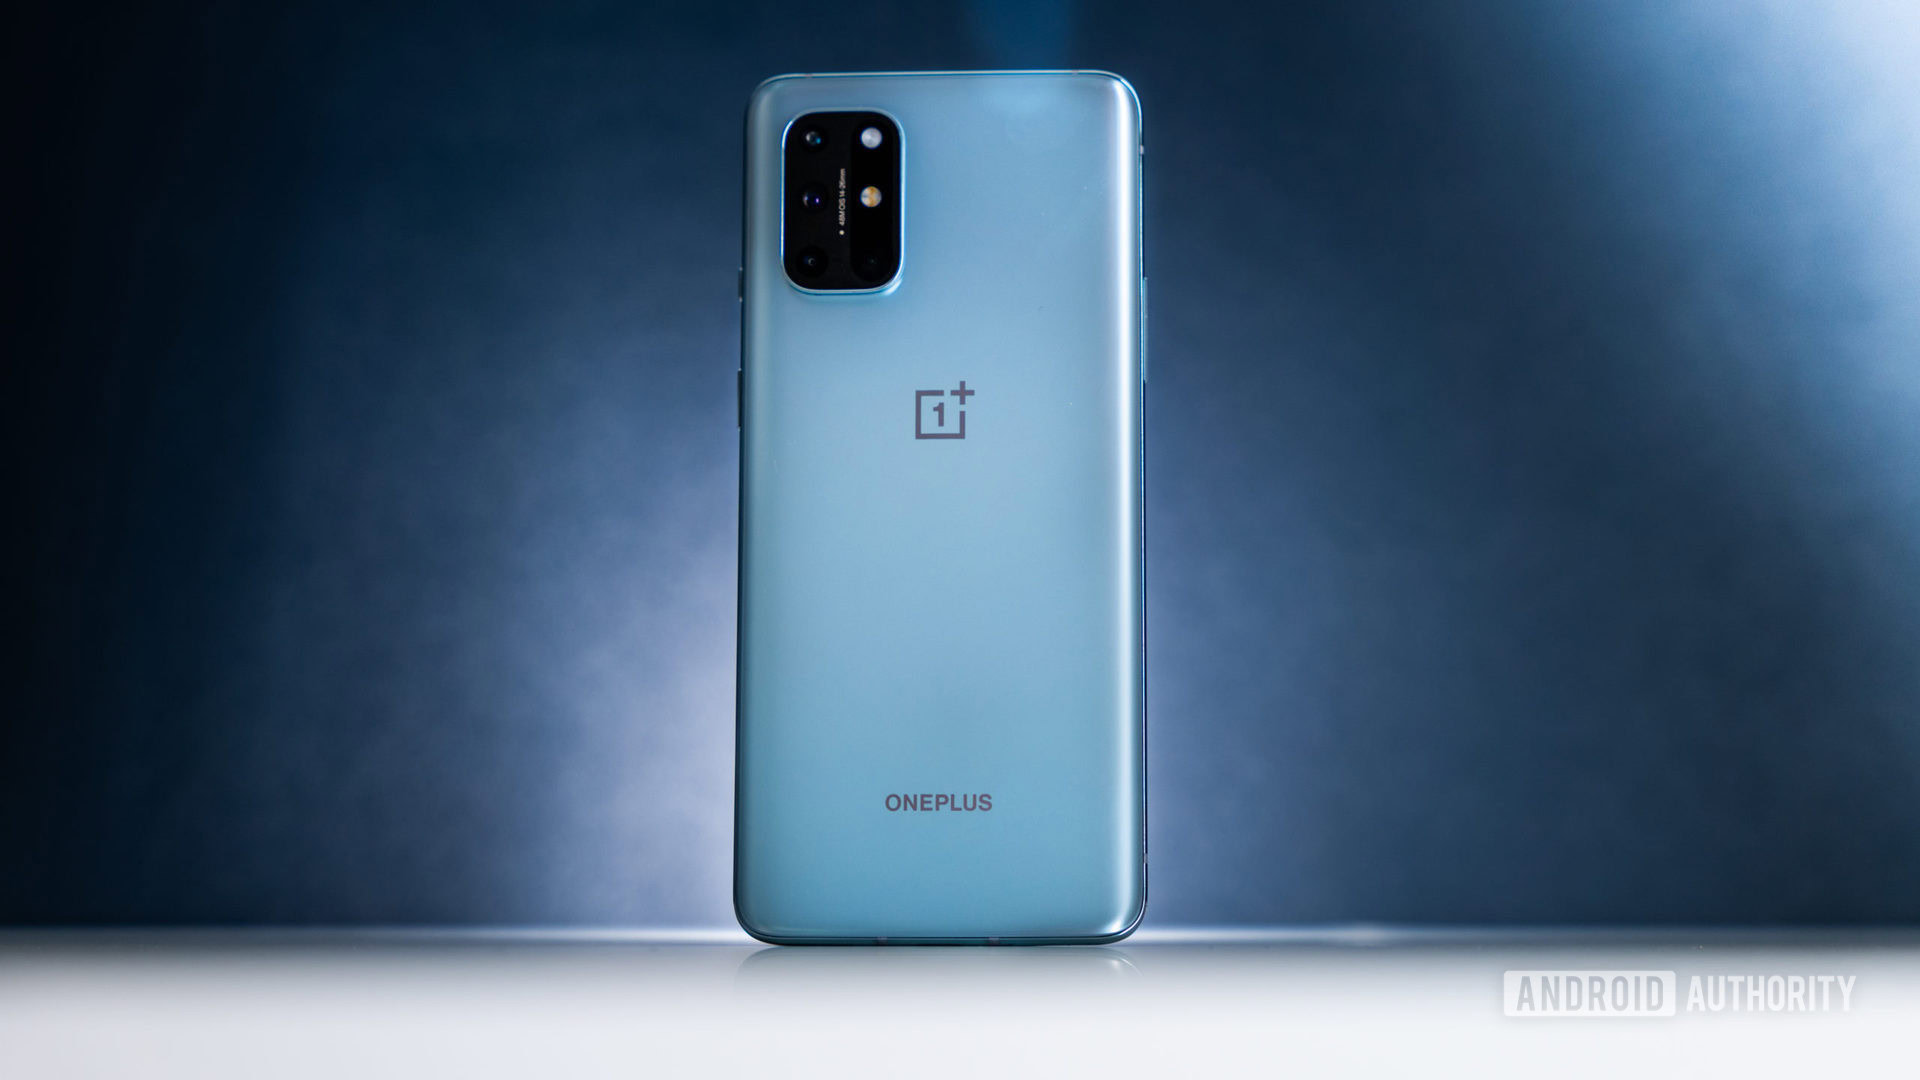 OnePlus 8T Review: A solid phone with small, yet meaningful